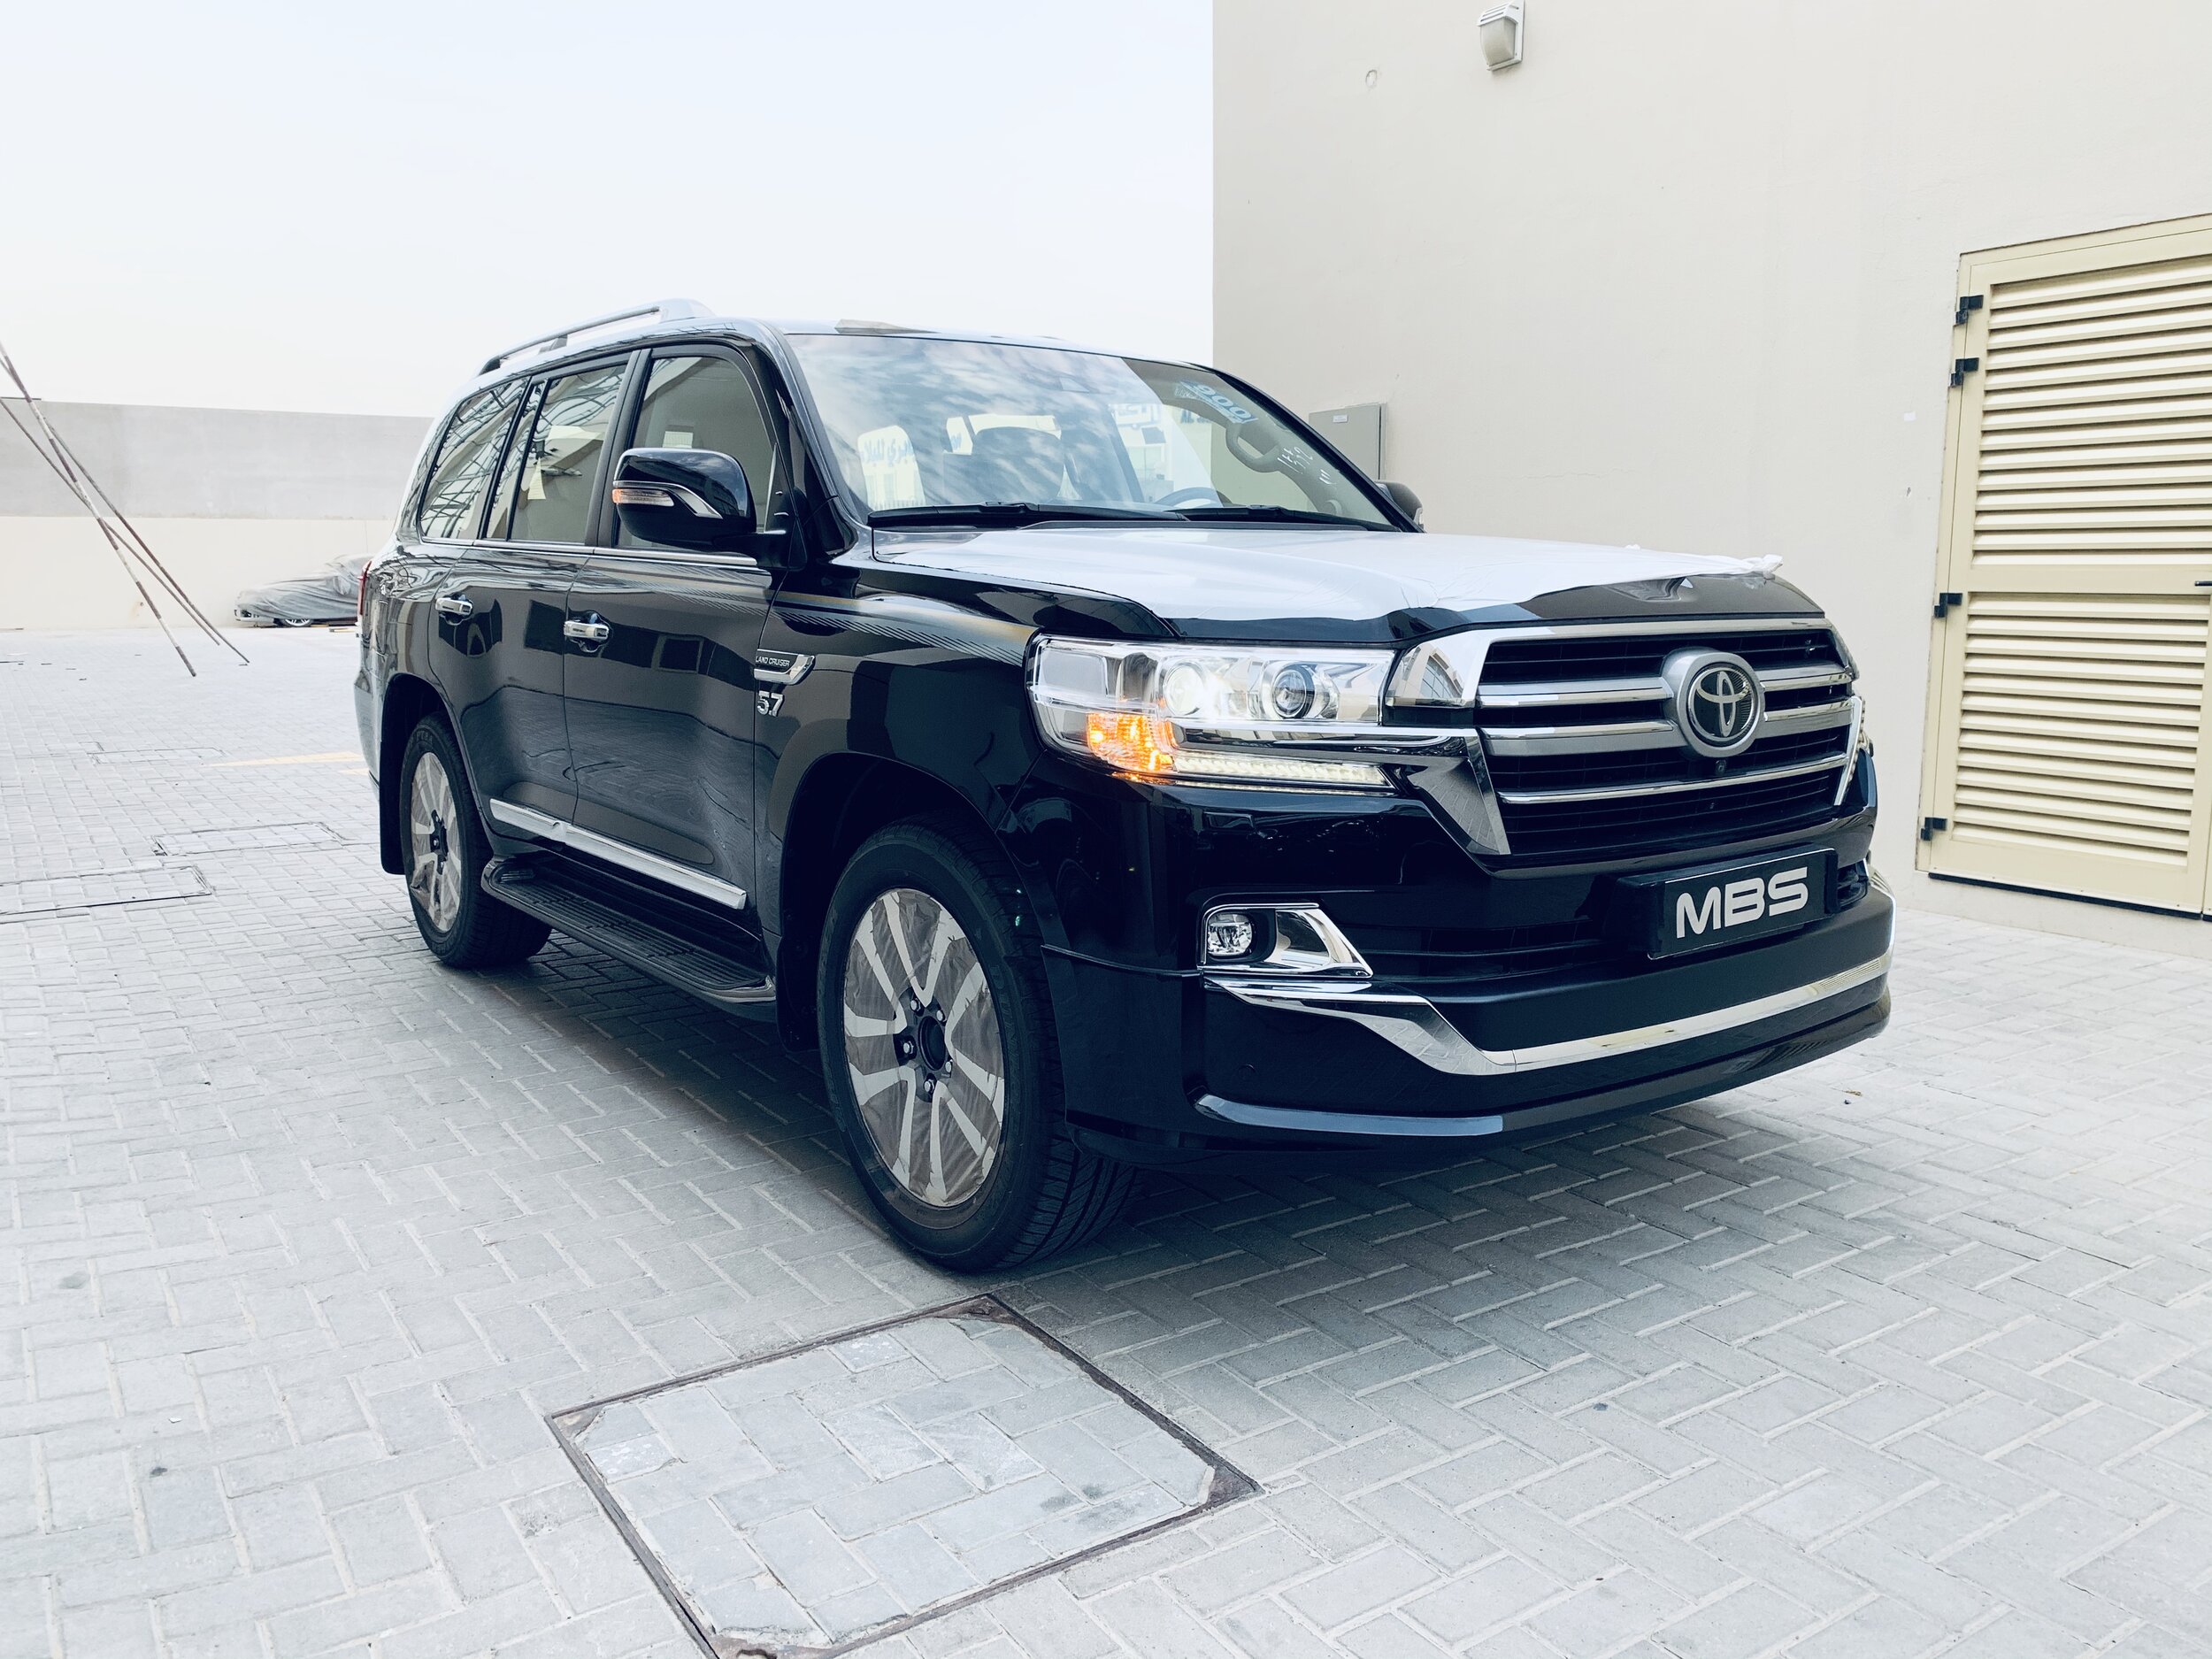 New Toyota Land Cruiser 200 MBS Autobiography for Export — MBS 